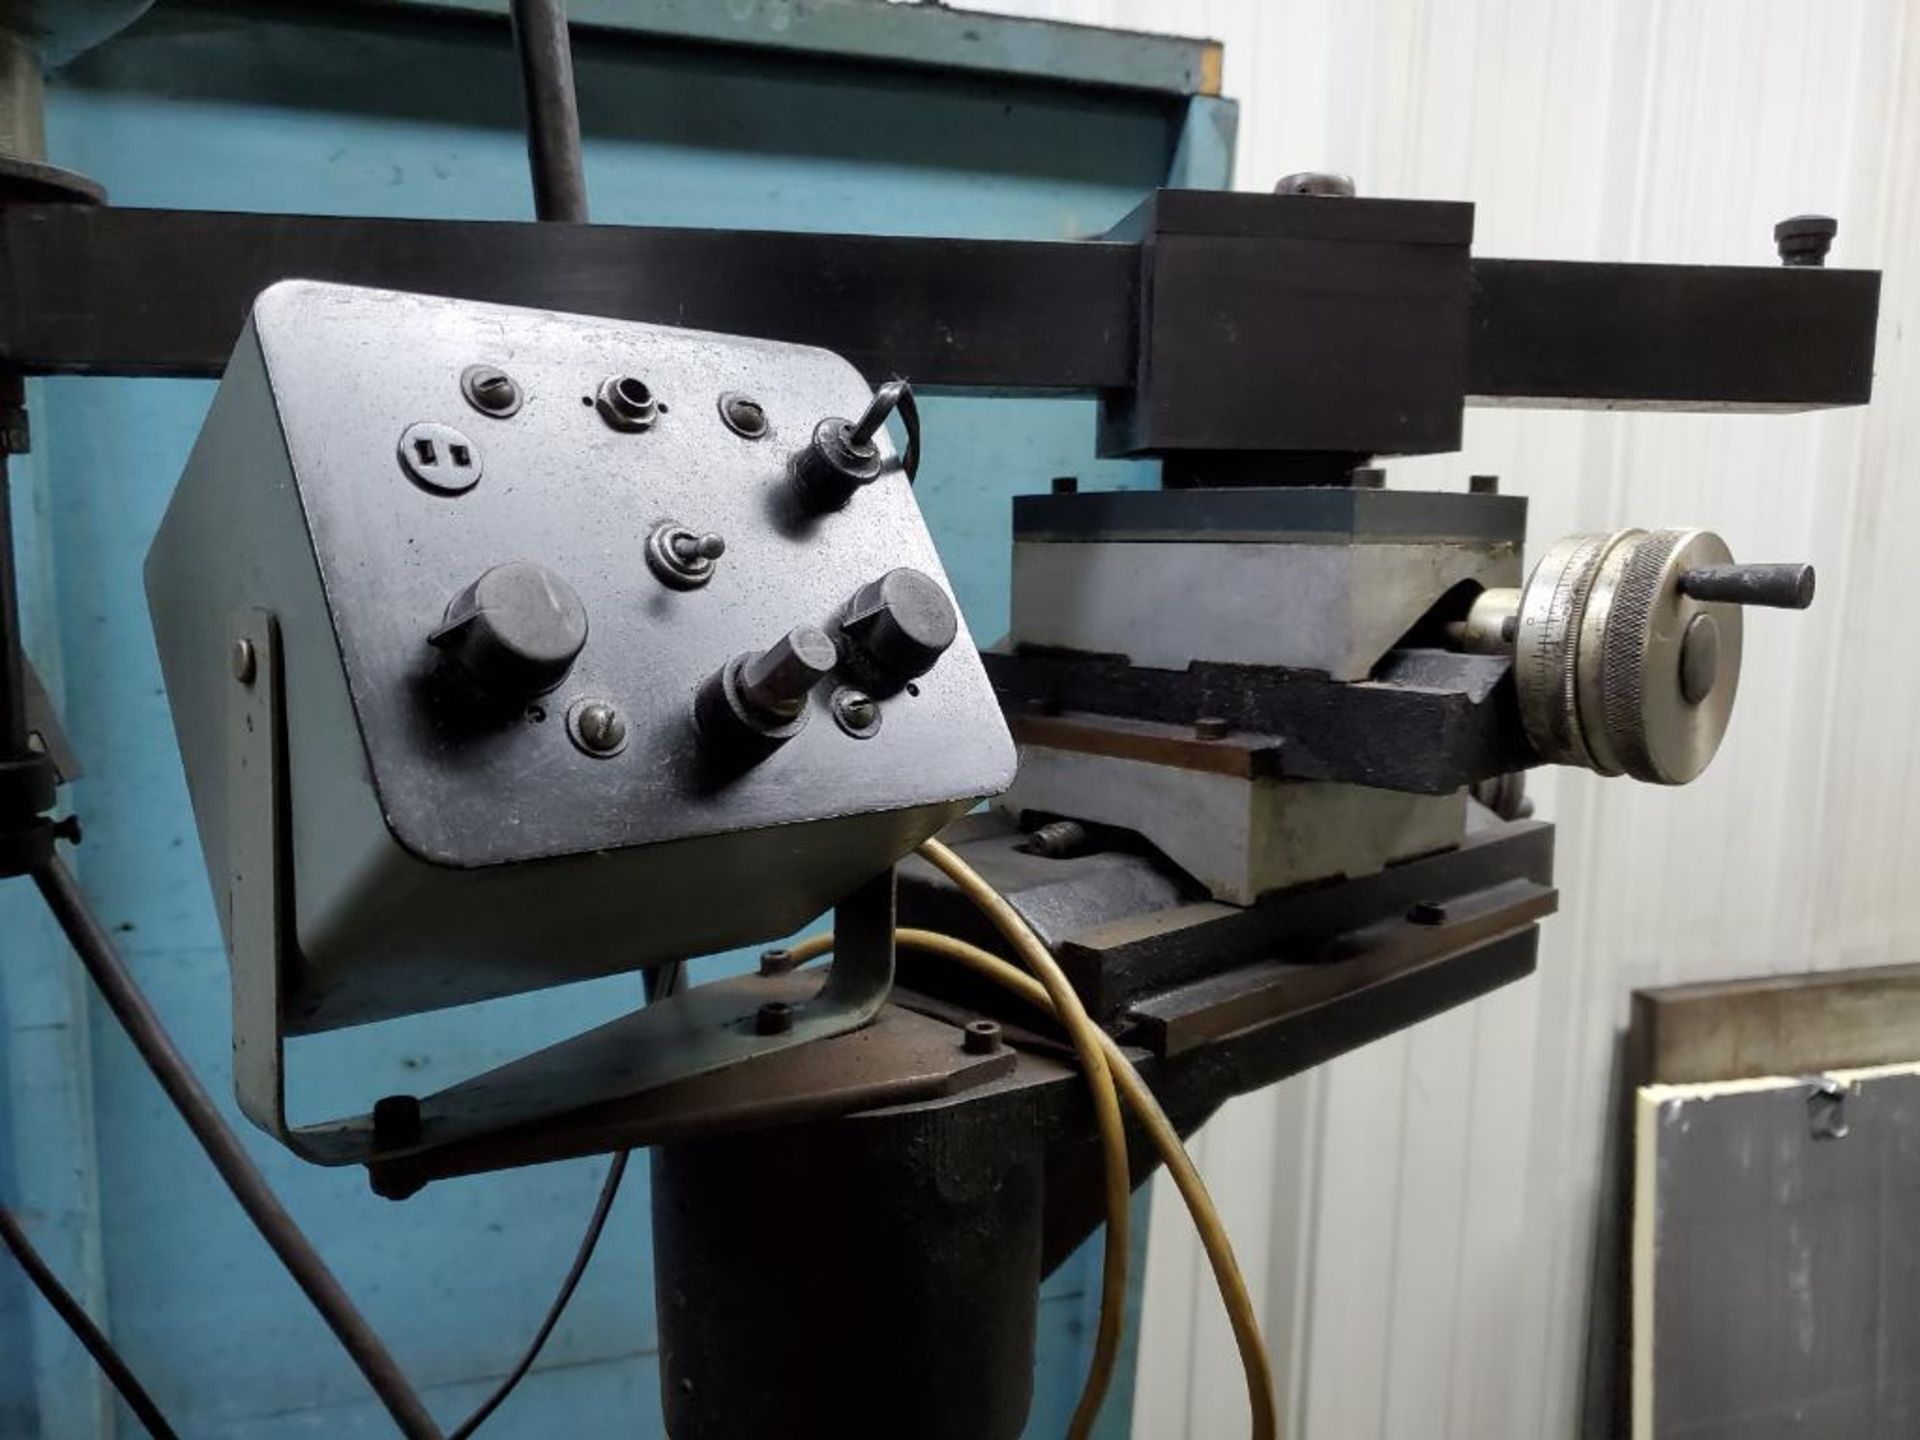 HAHN & KOLB STUTTGART PRECISION TOOL SHARPENER WITH STOCKER YALE COMPARATOR, ROTARY GRIND HEAD, - Image 7 of 8